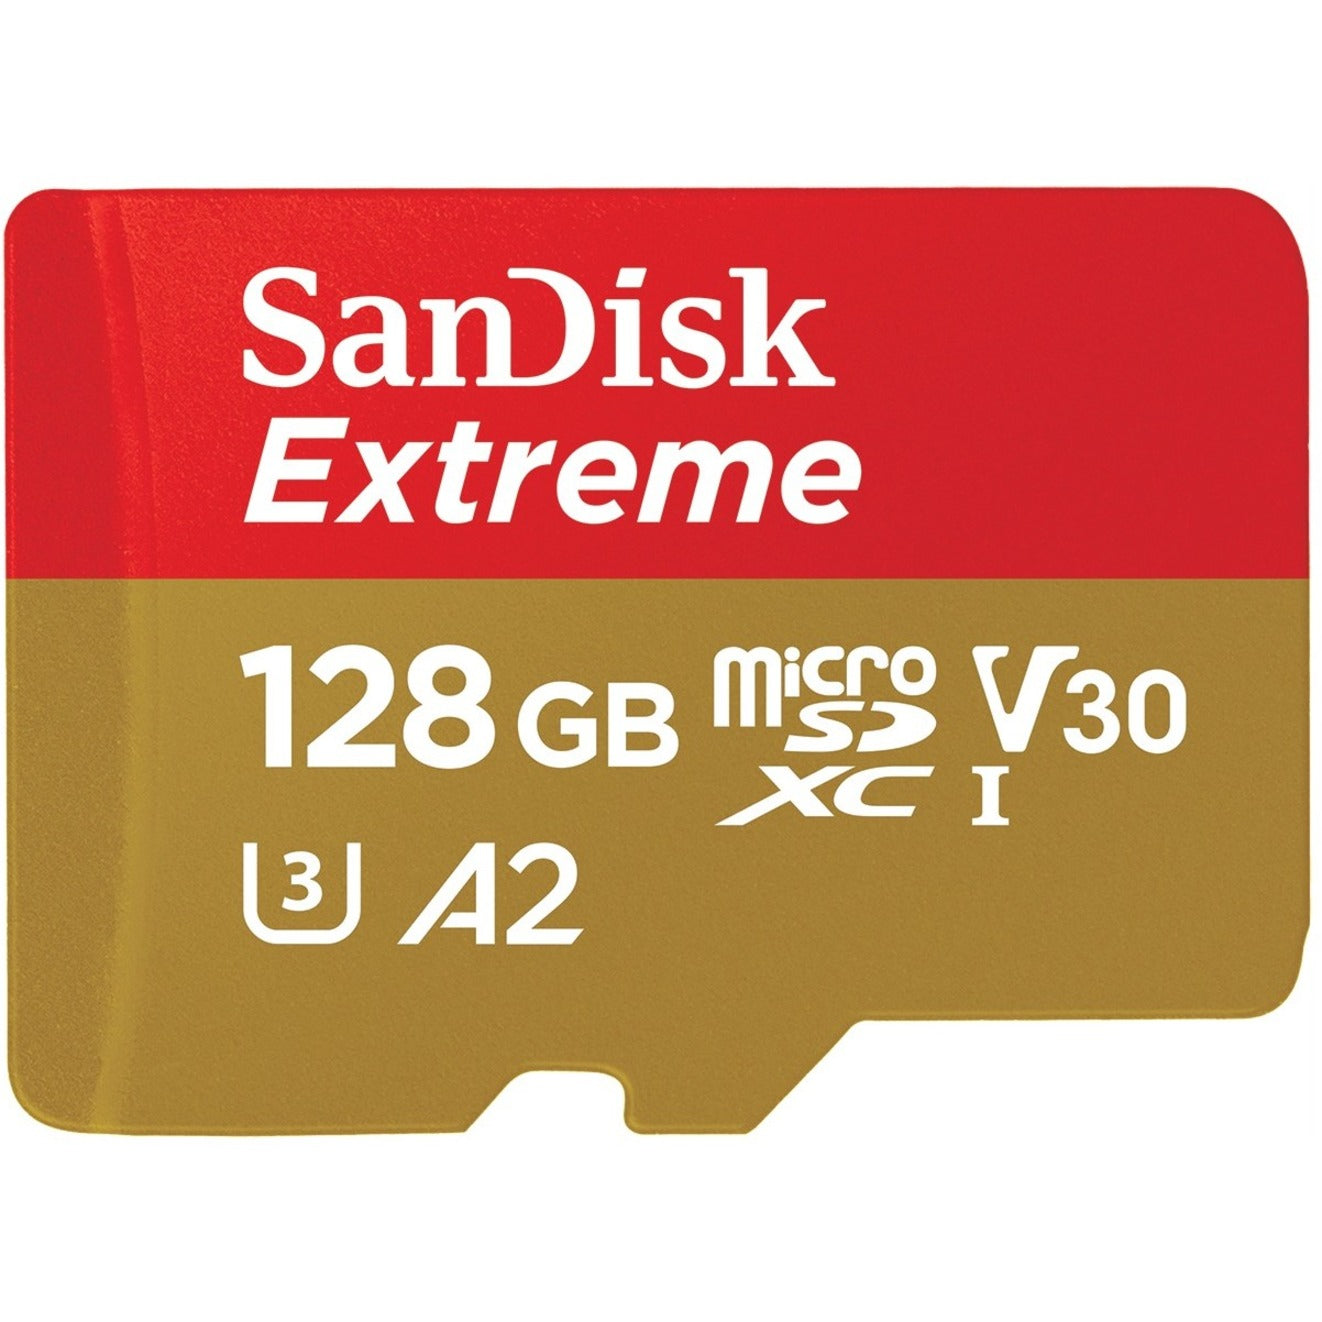 SanDisk SDSQXA1-128G-AN6MA Extreme microSD UHS-I Card - 128GB, High-Speed Storage for Your Devices [Discontinued]